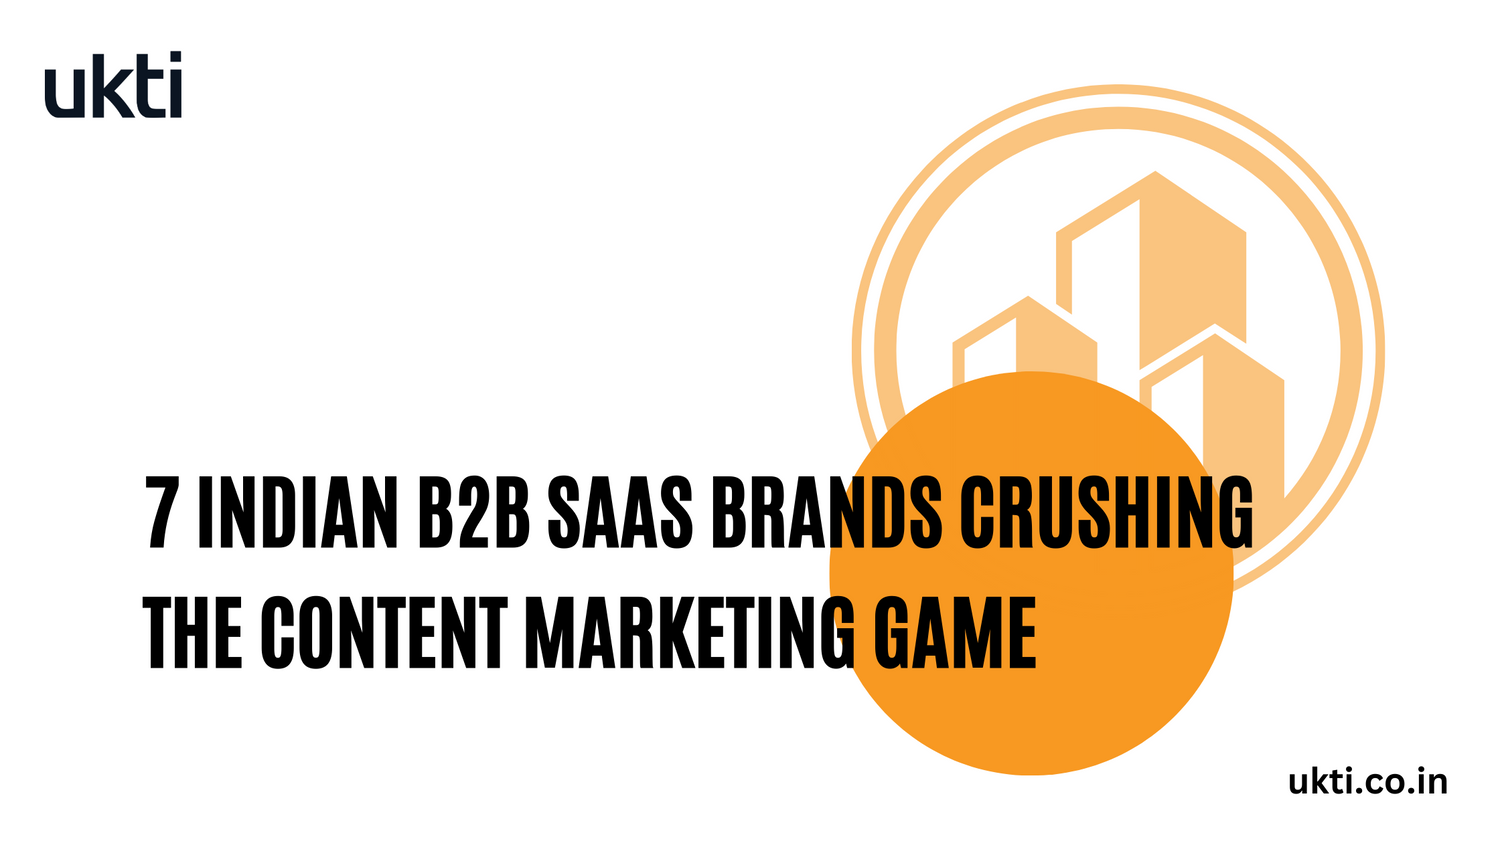 Examples of Indian B2B SaaS brands crushing the content game